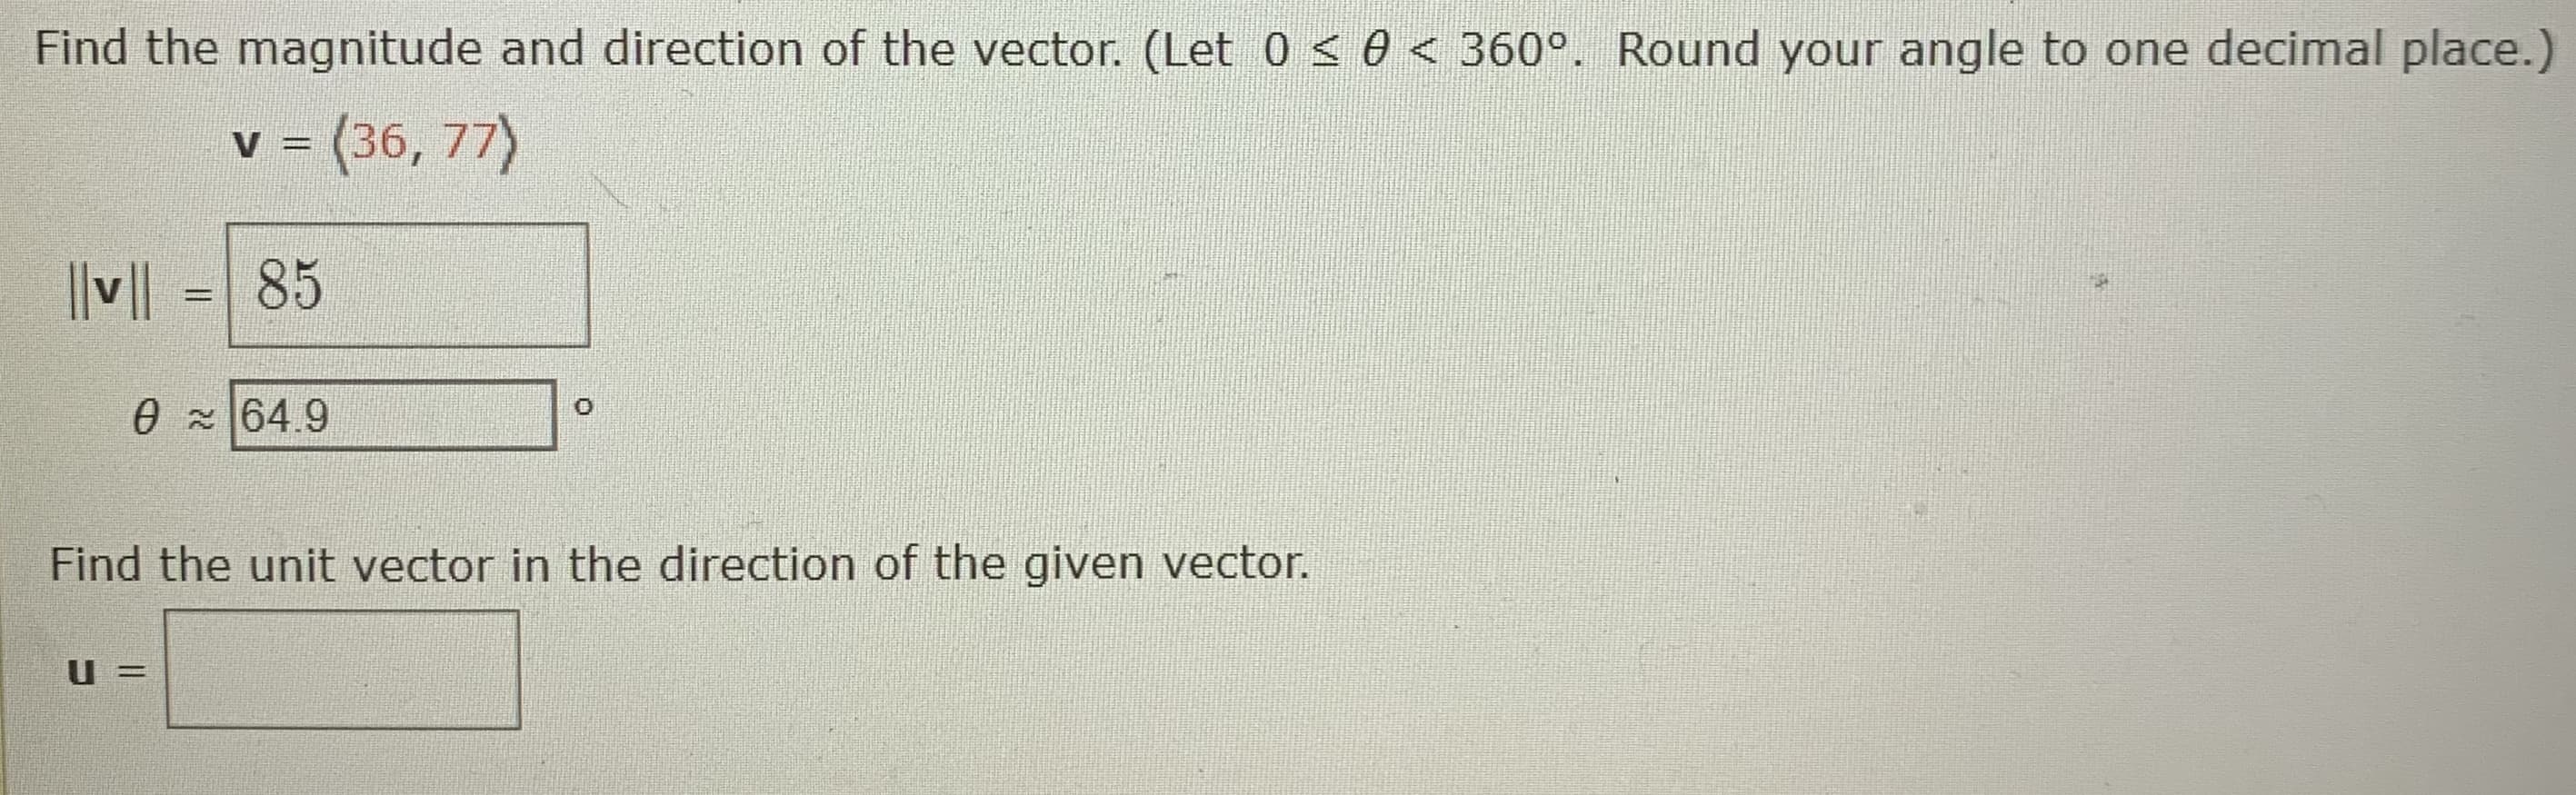 Find the magnitude and direction of the vector. (Let 0 < 0 < 360°. Round your angle to one decimal place.)
=(36,77)
||v||
85
%3D
0 x64.9
Find the unit vector in the direction of the given vector.
U =
